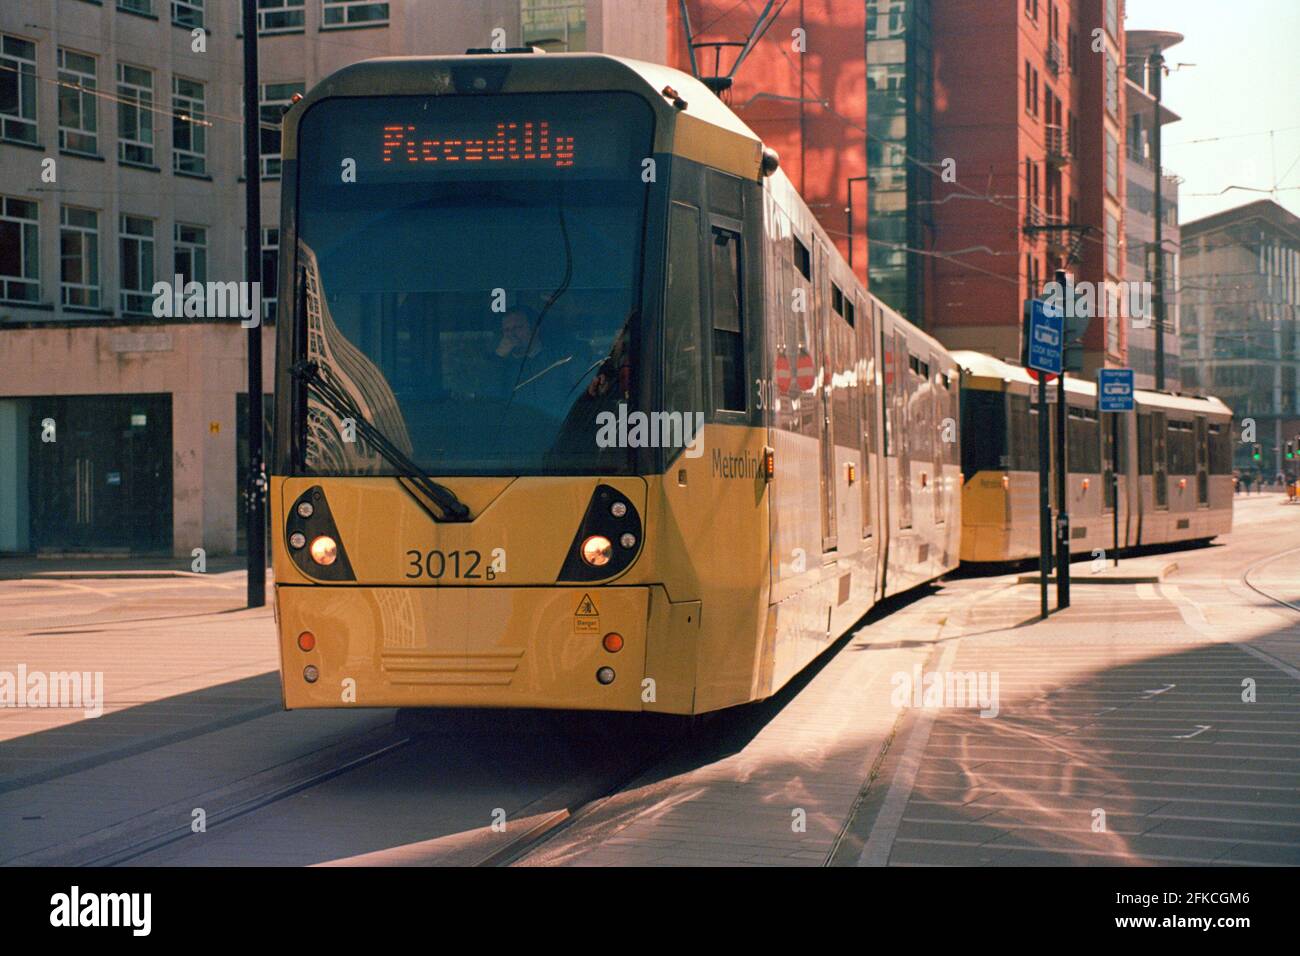 Manchester, UK - 3 April 2021: A Manchester Metrolink tram (Bombardier M5000, no. 3012) at St Peter's Square. Stock Photo